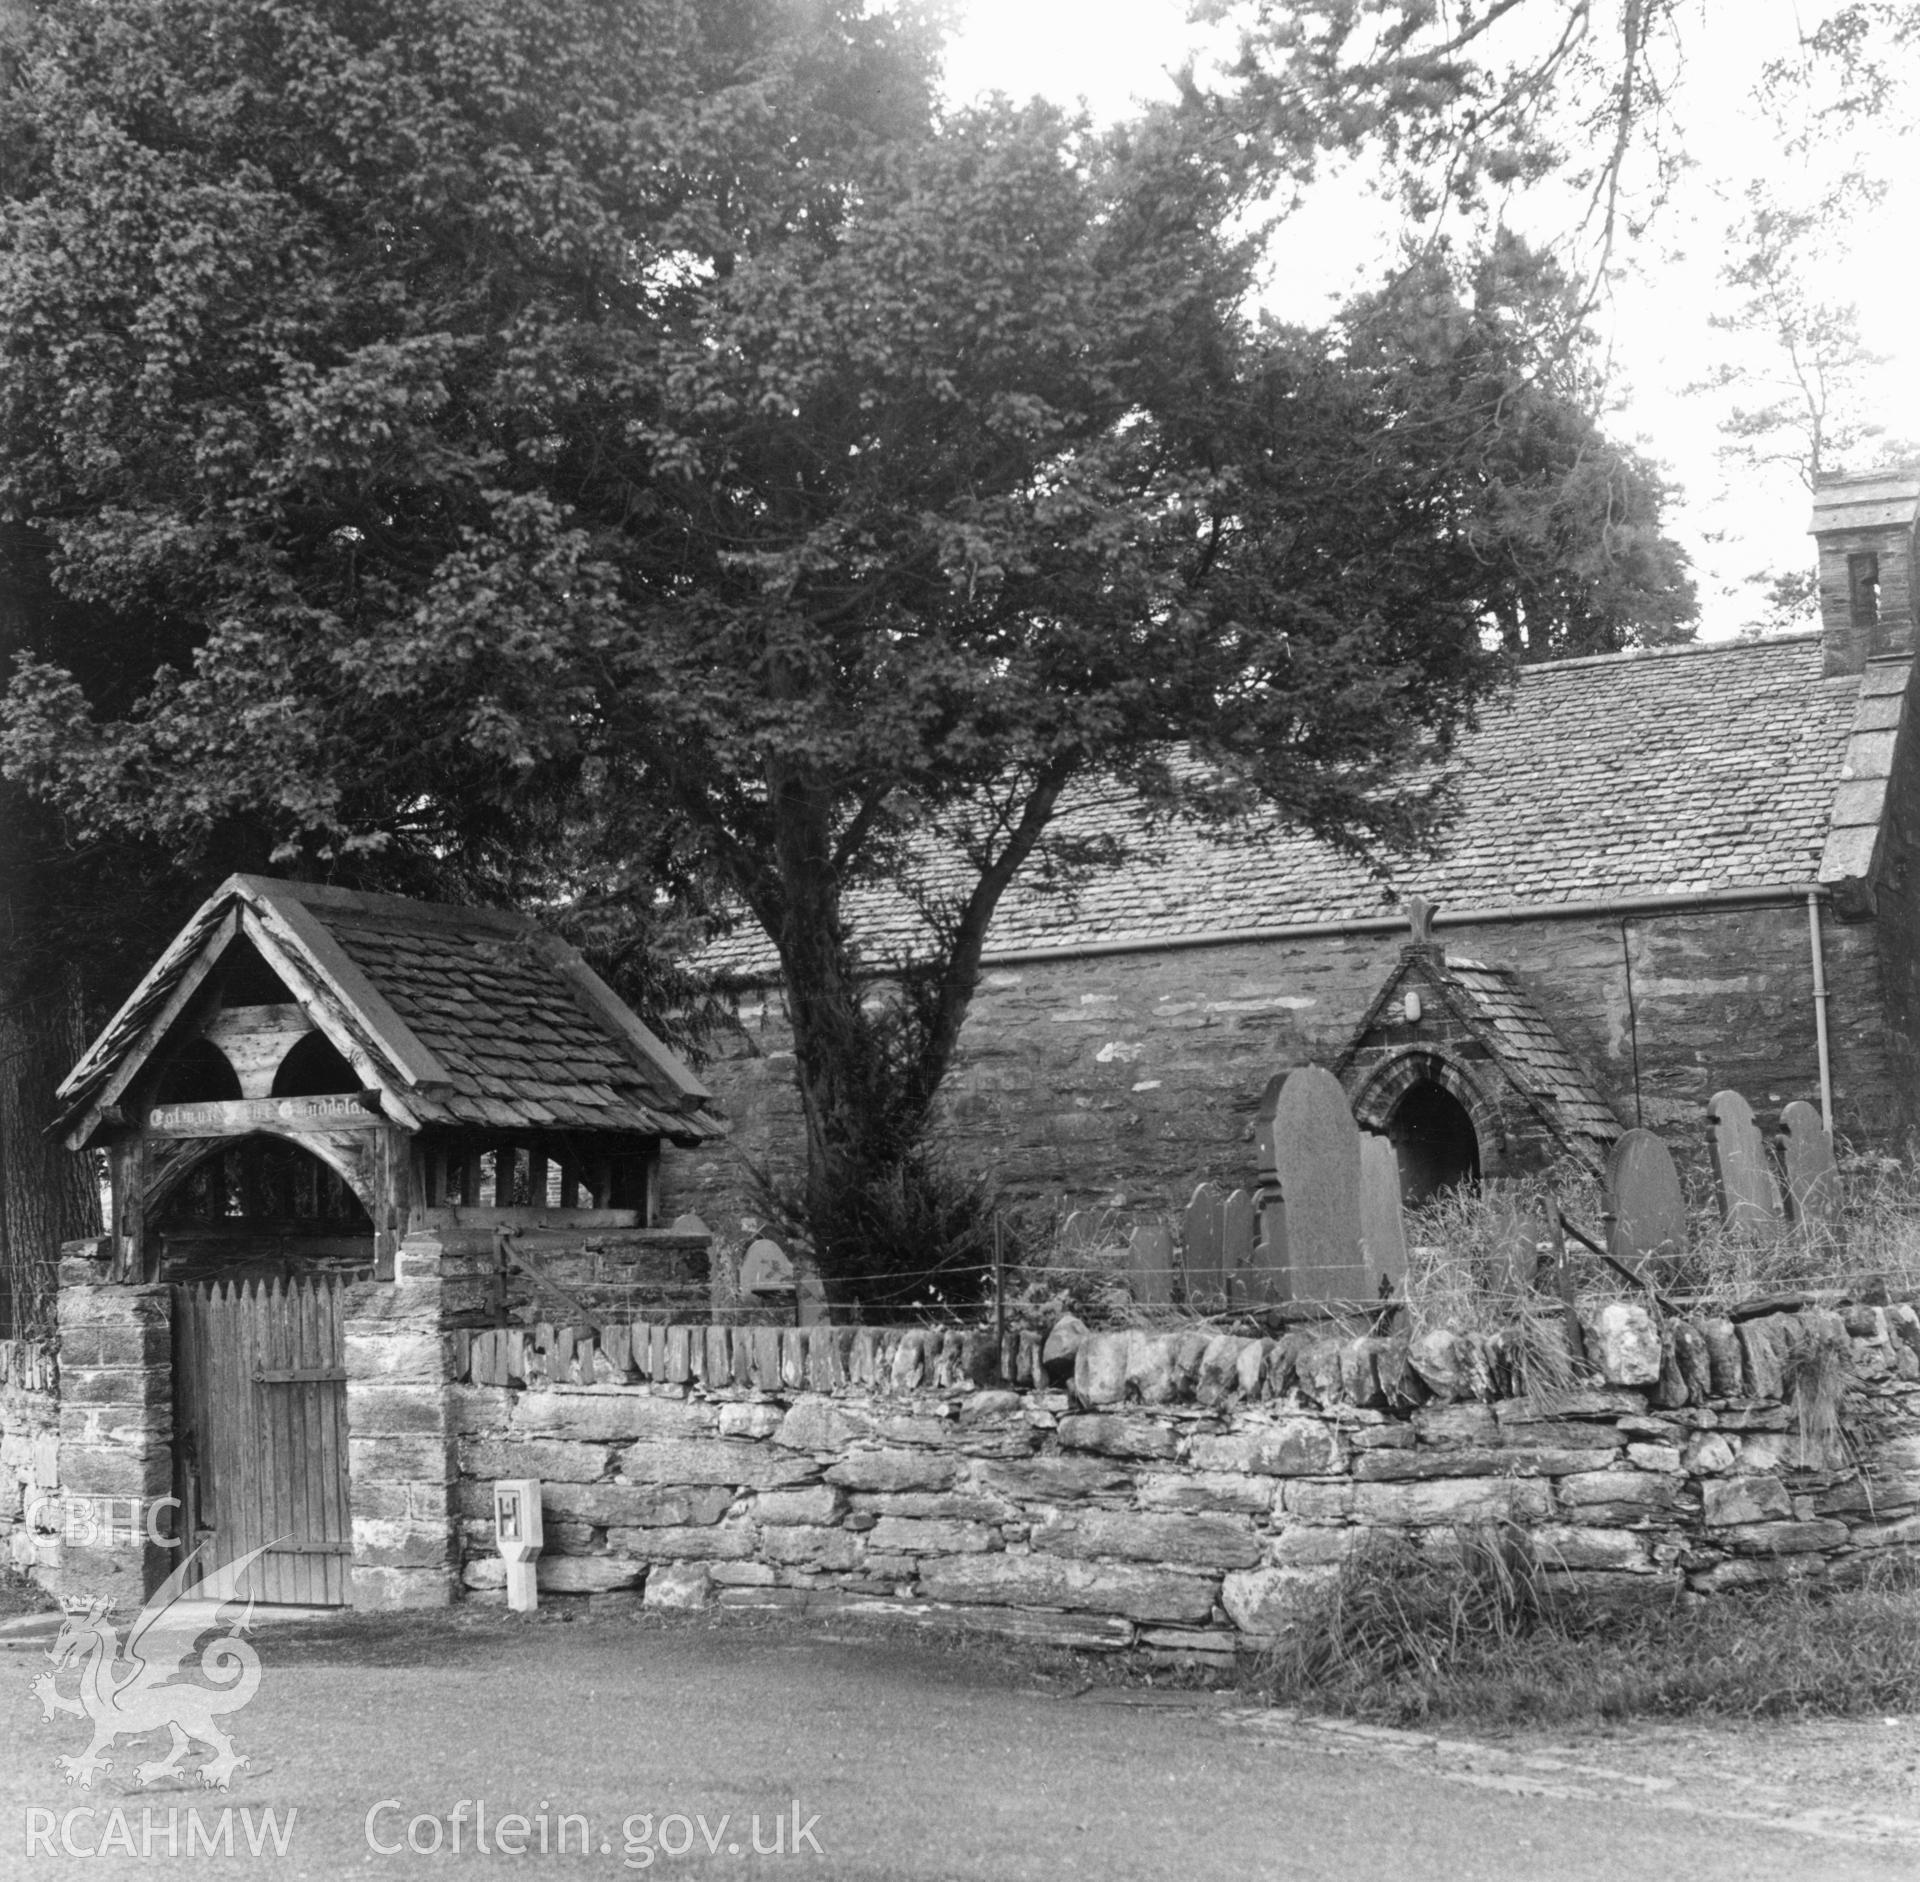 1 b/w print showing view of St Gwyddelan church, Dolwyddelan, showing lych-gate intact; collated by the former Central Office of Information.